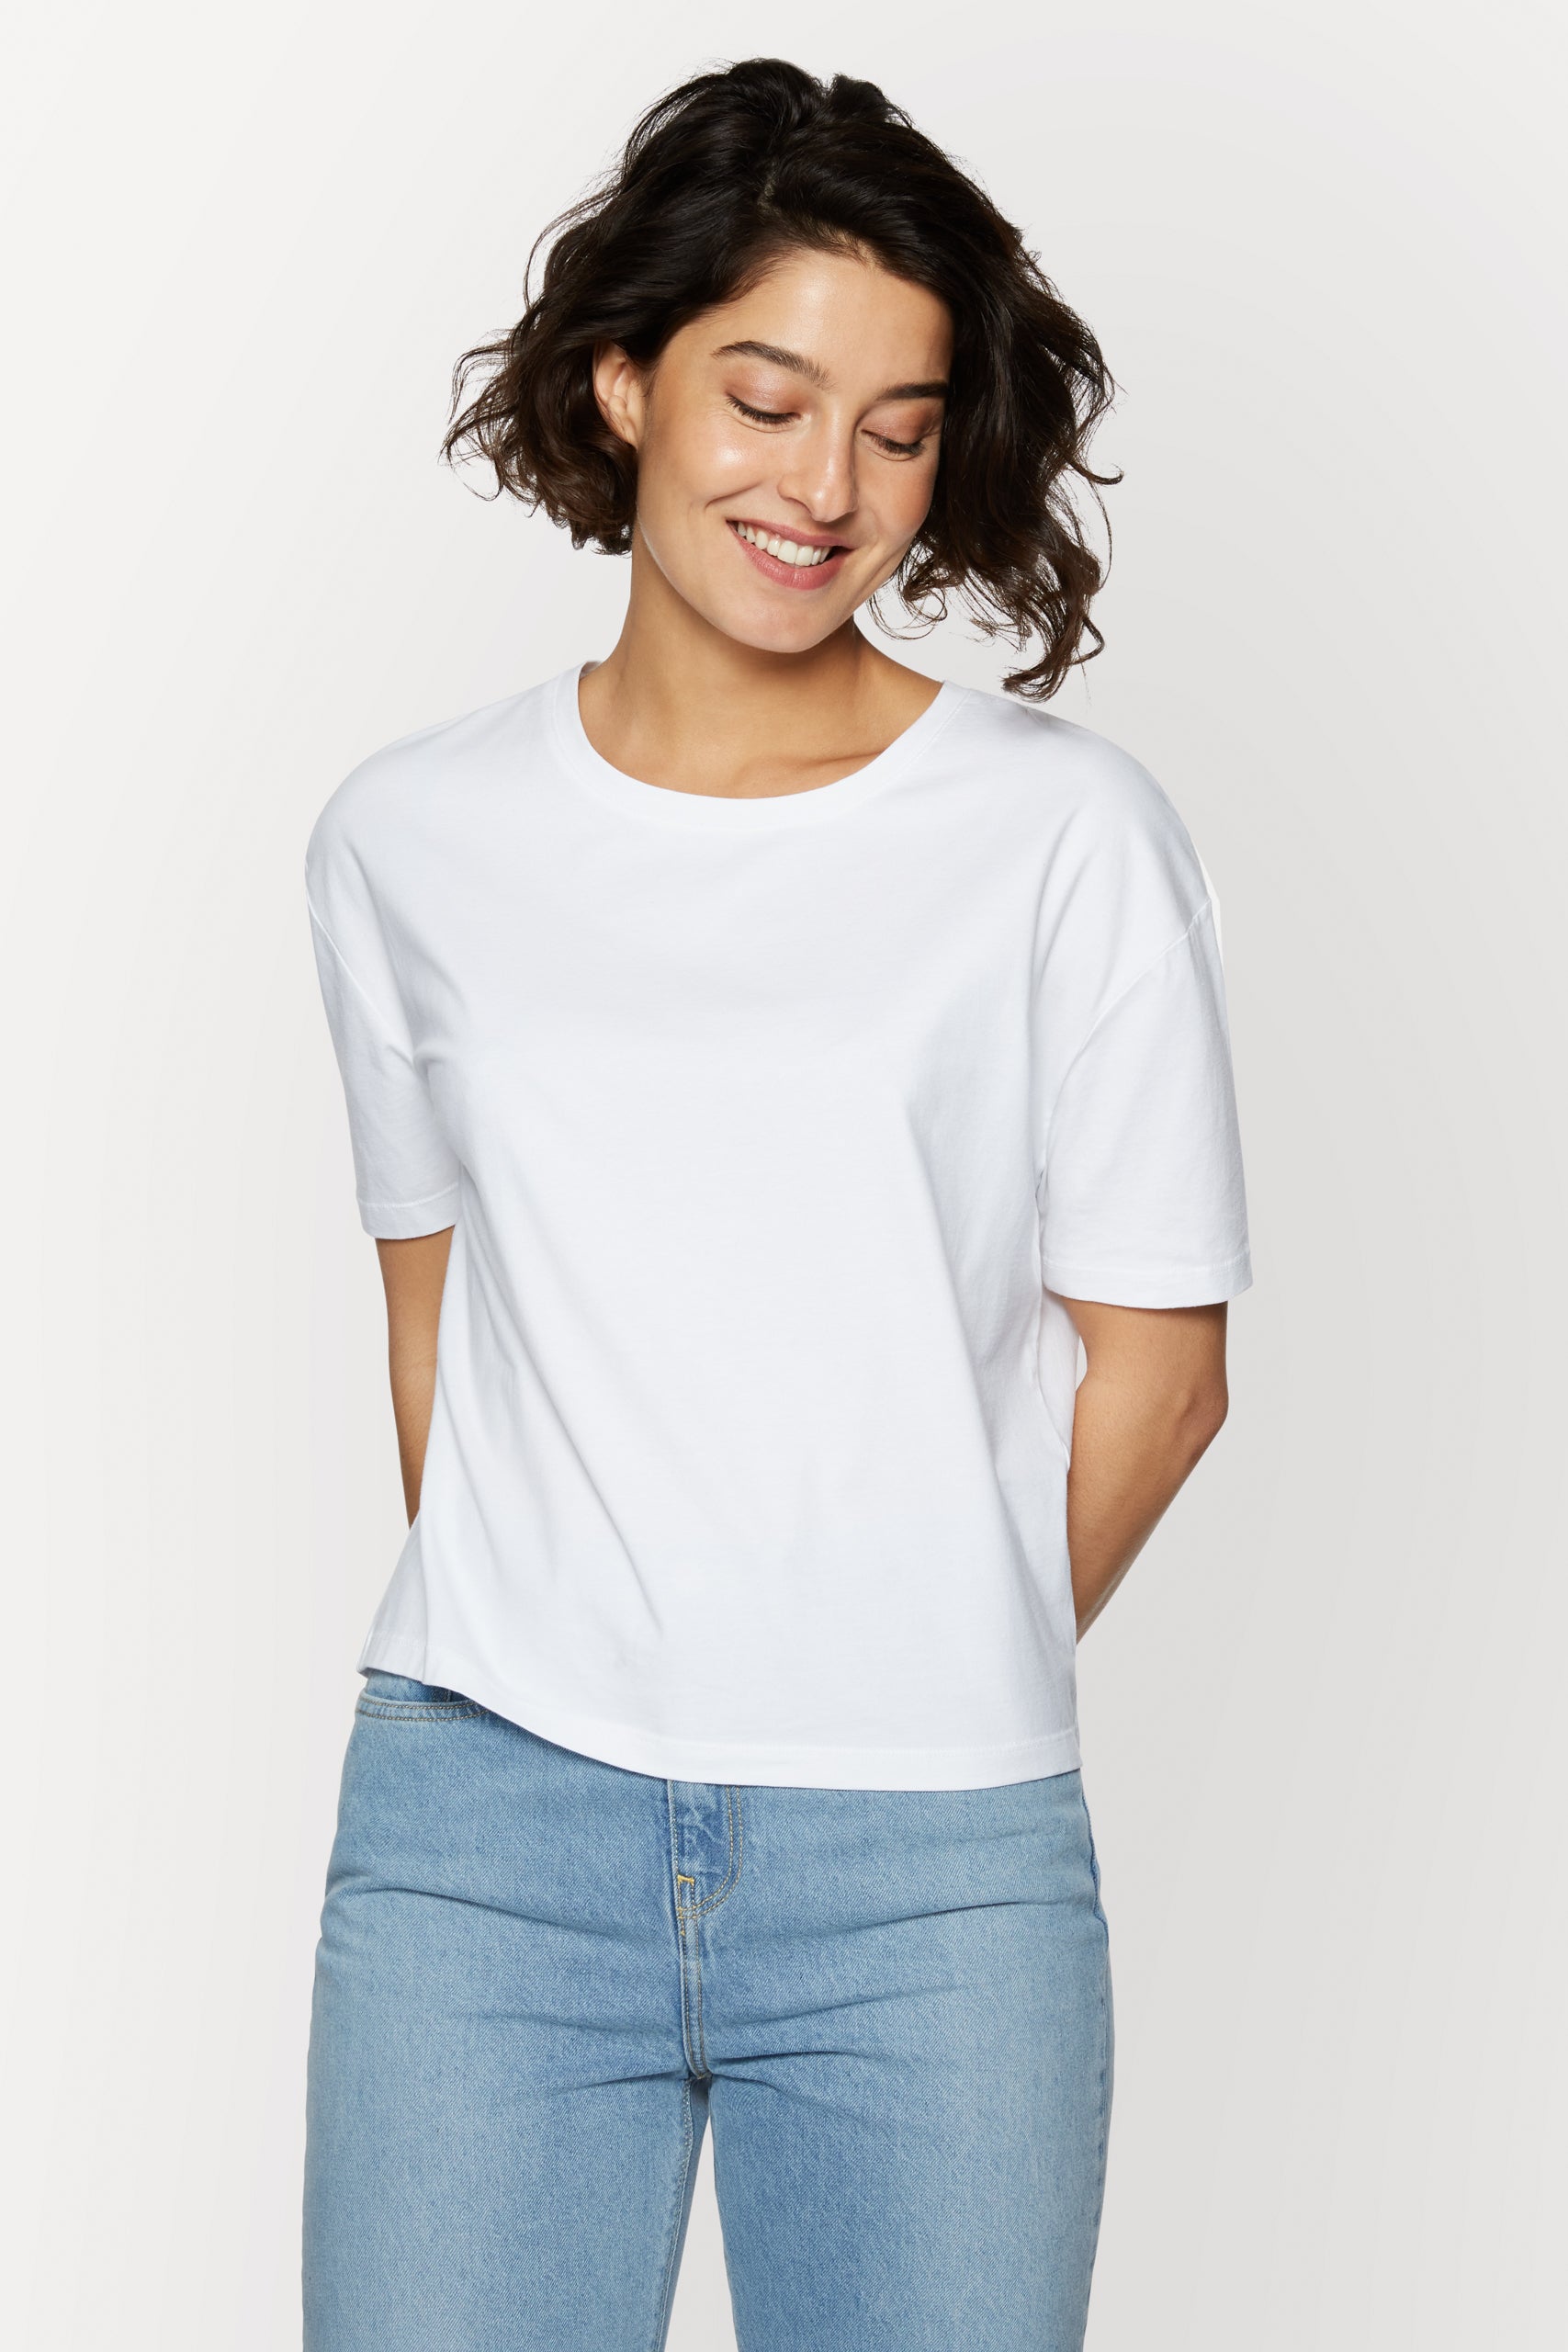 CharlieMary | The perfect white cotton t-shirt